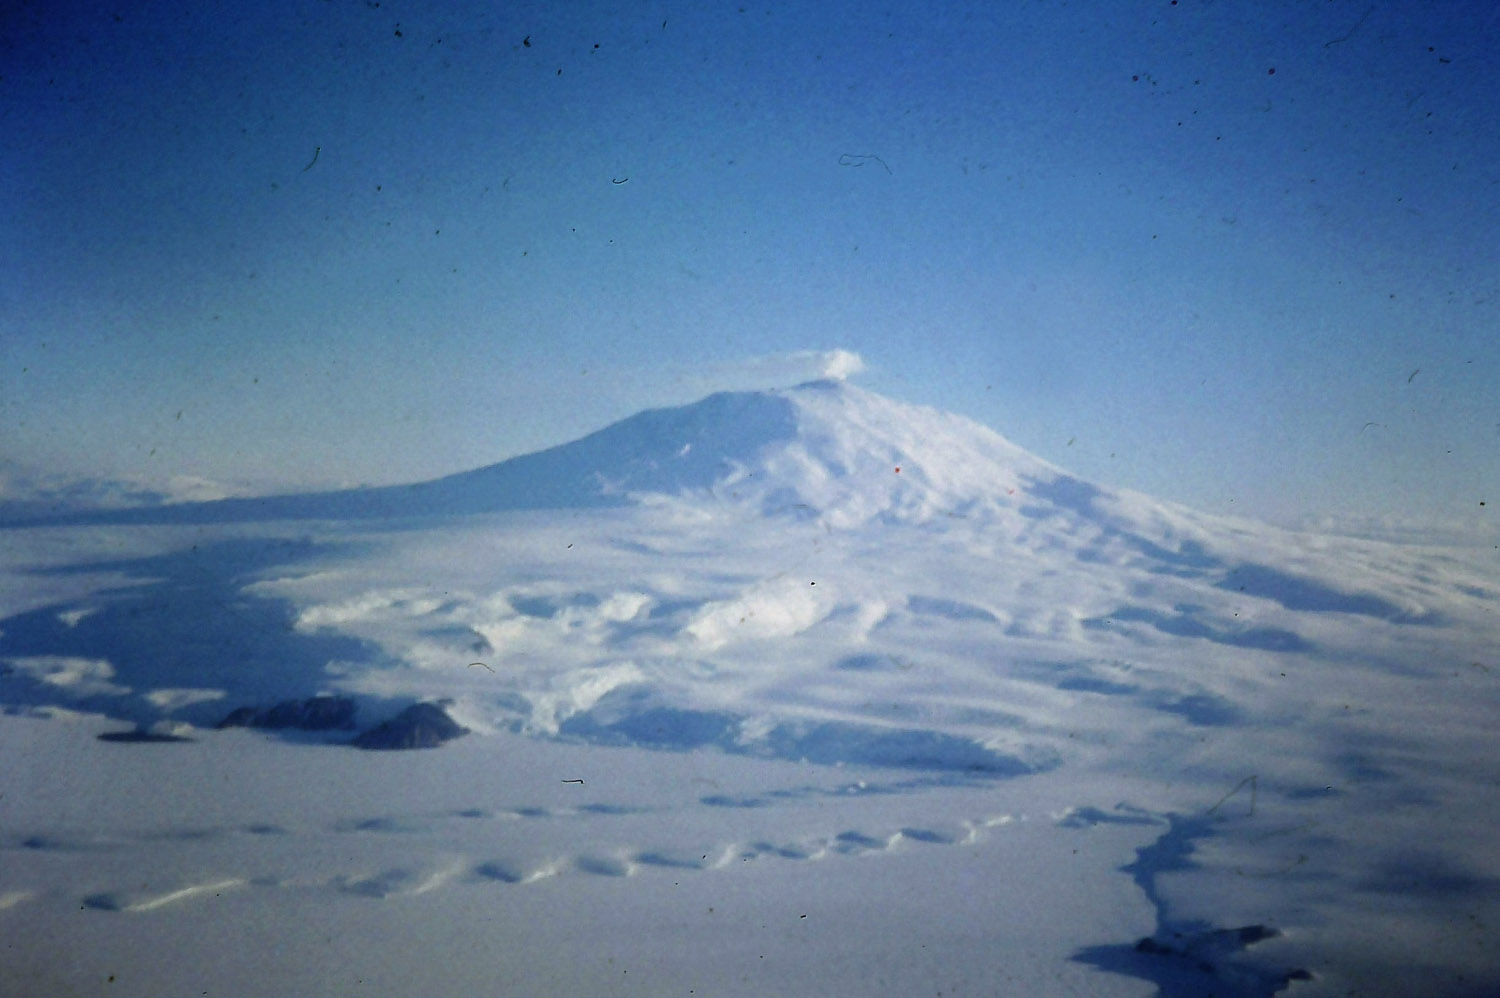 Mount Erebus seen from the air, with glacier in the foreground